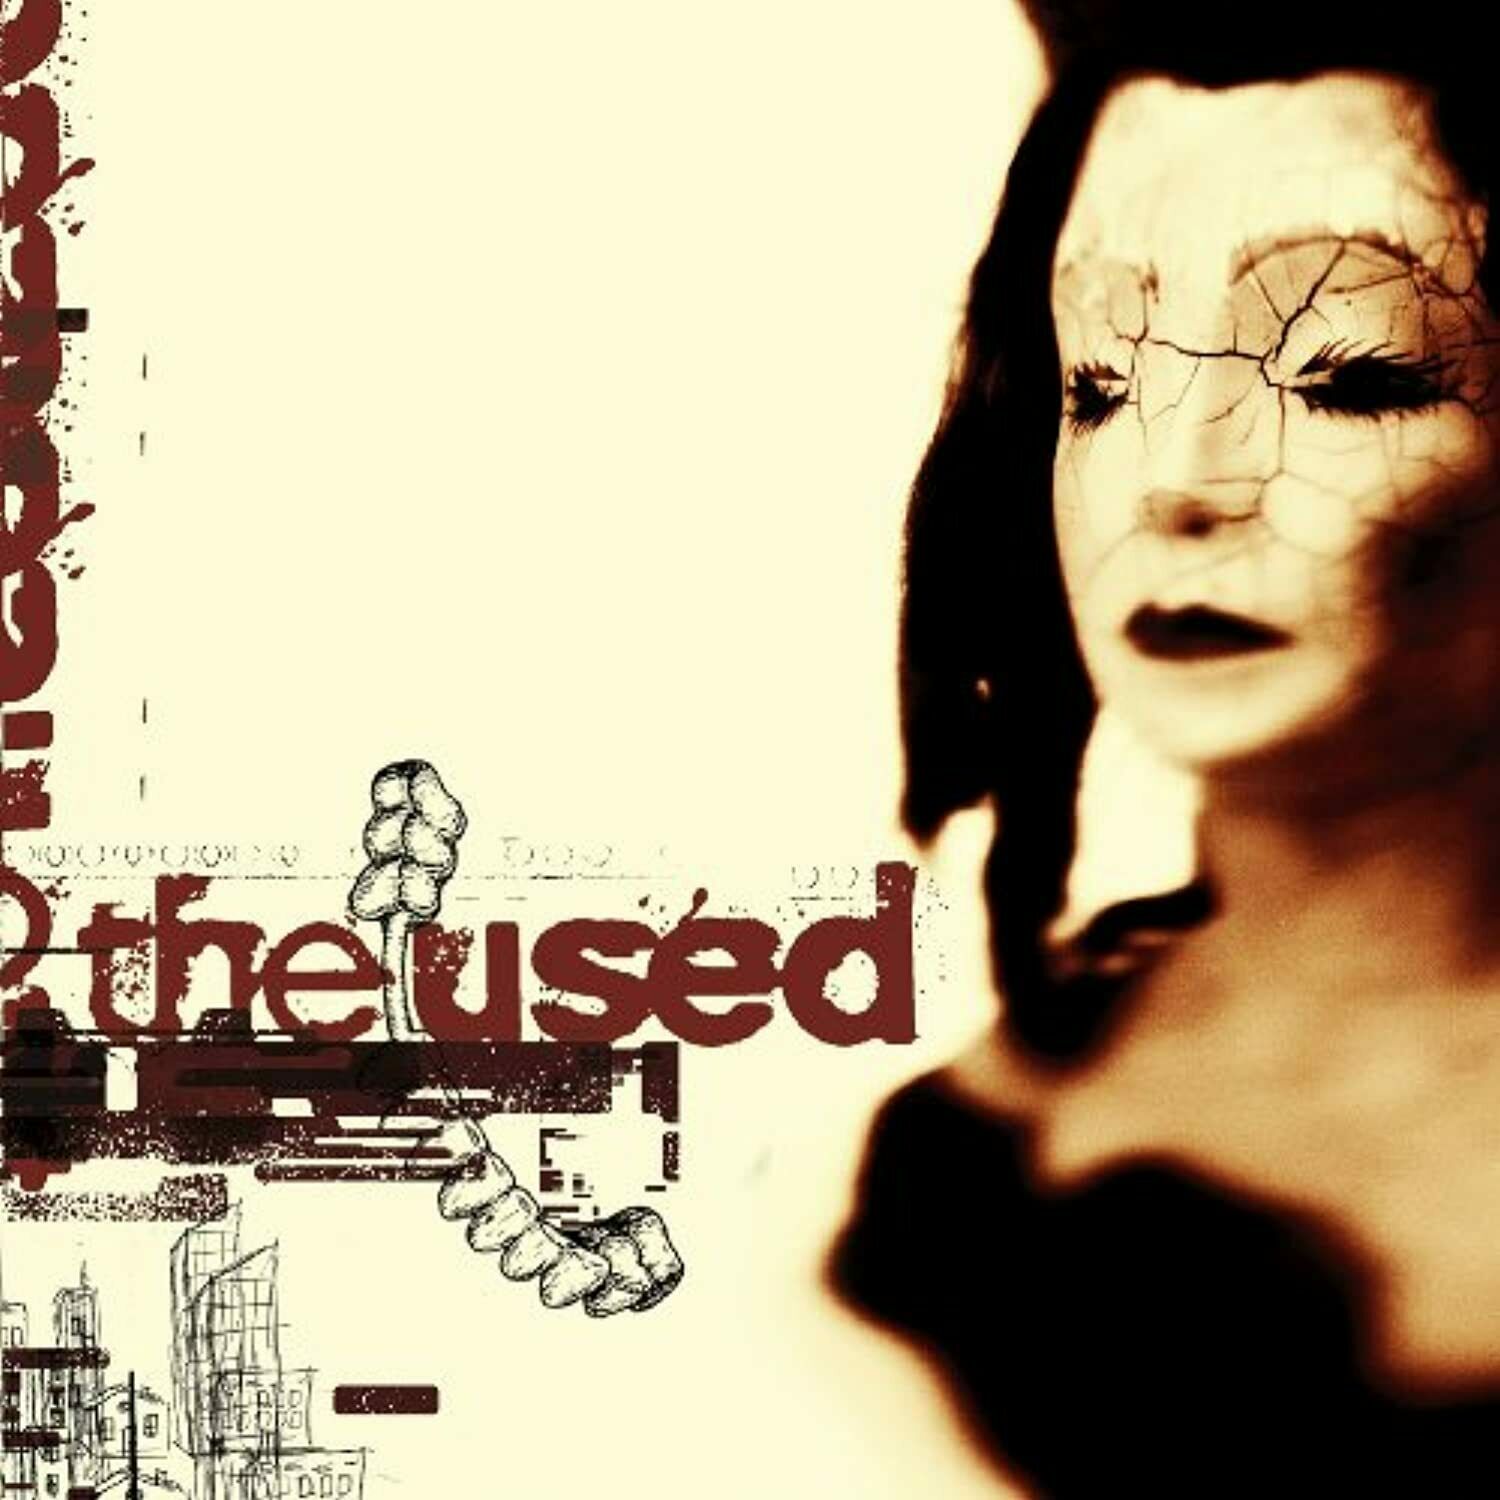 ST / THE USED